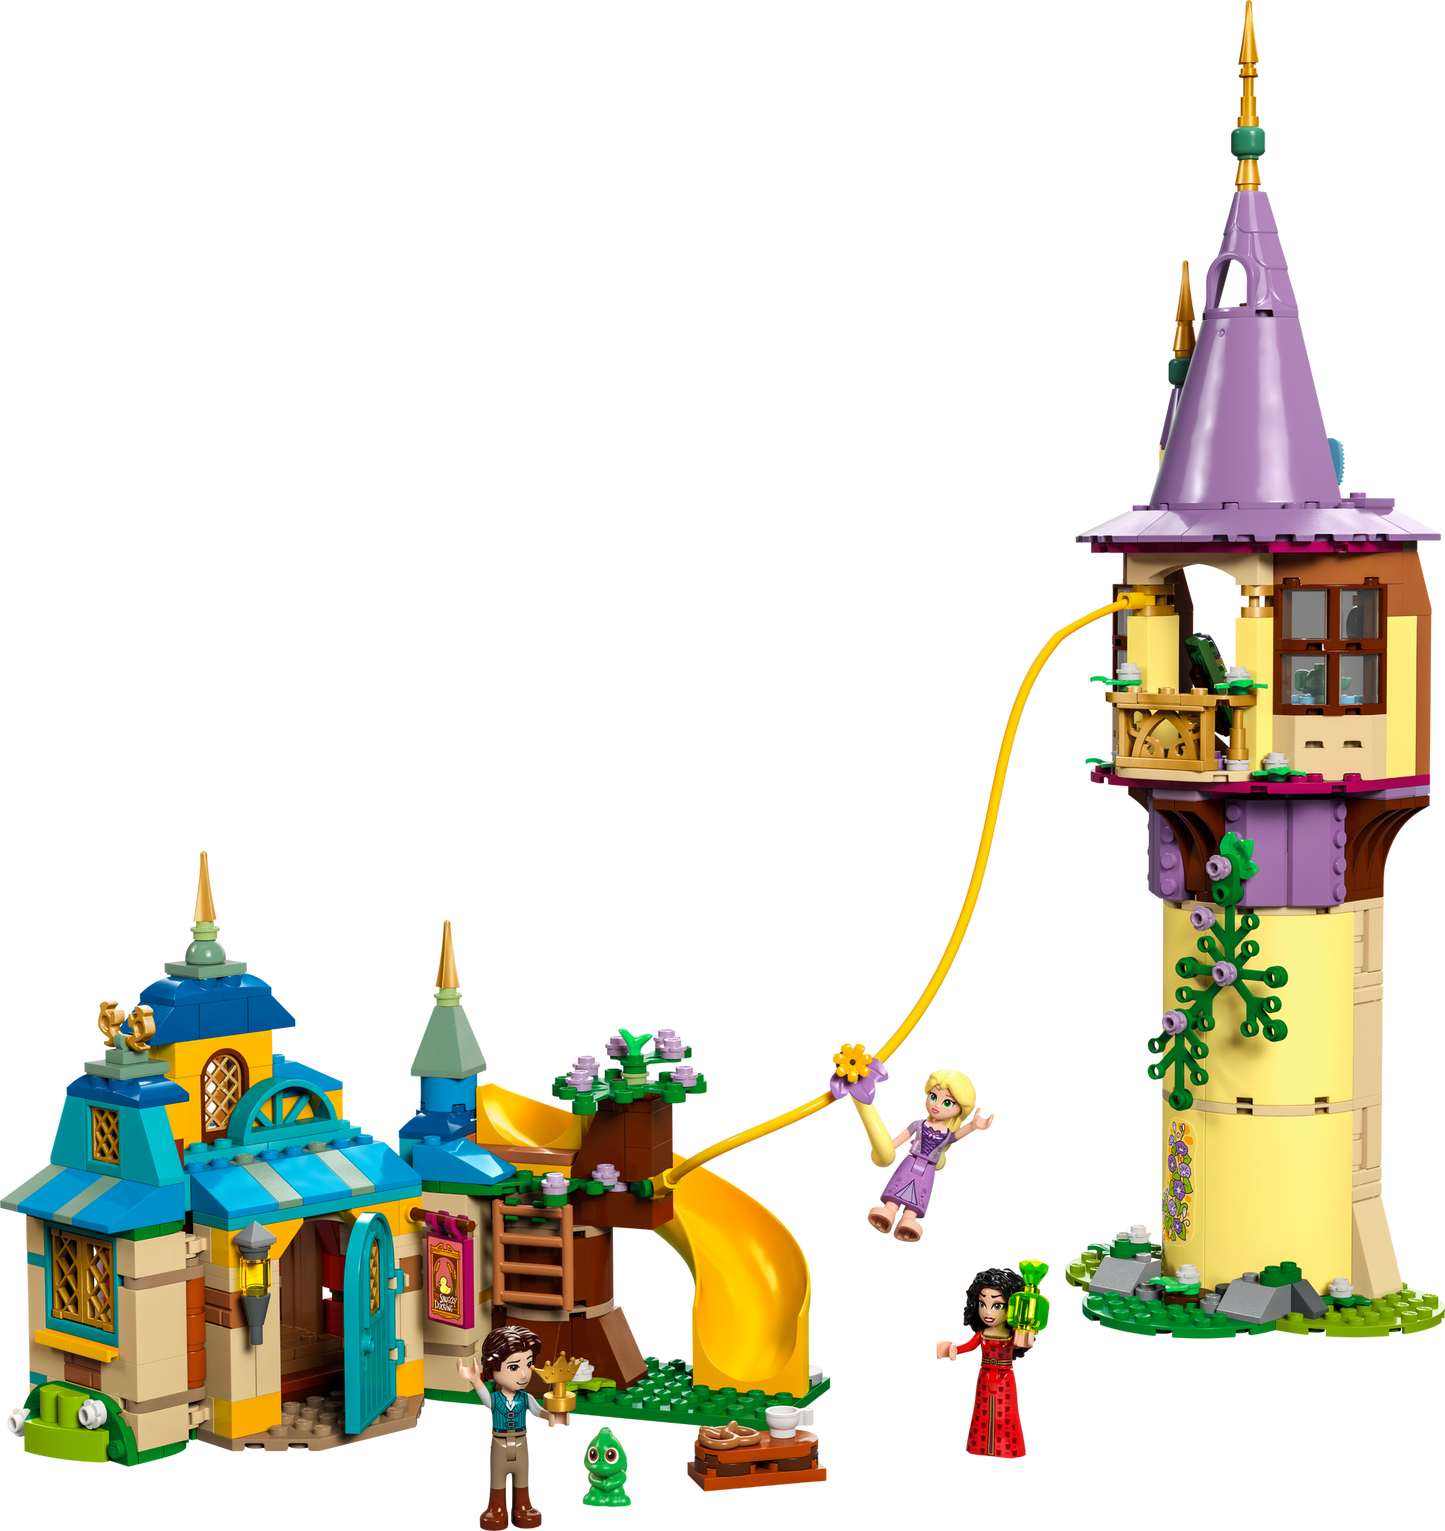 43241 Rapunzel's Tower & The Snuggly Duckling